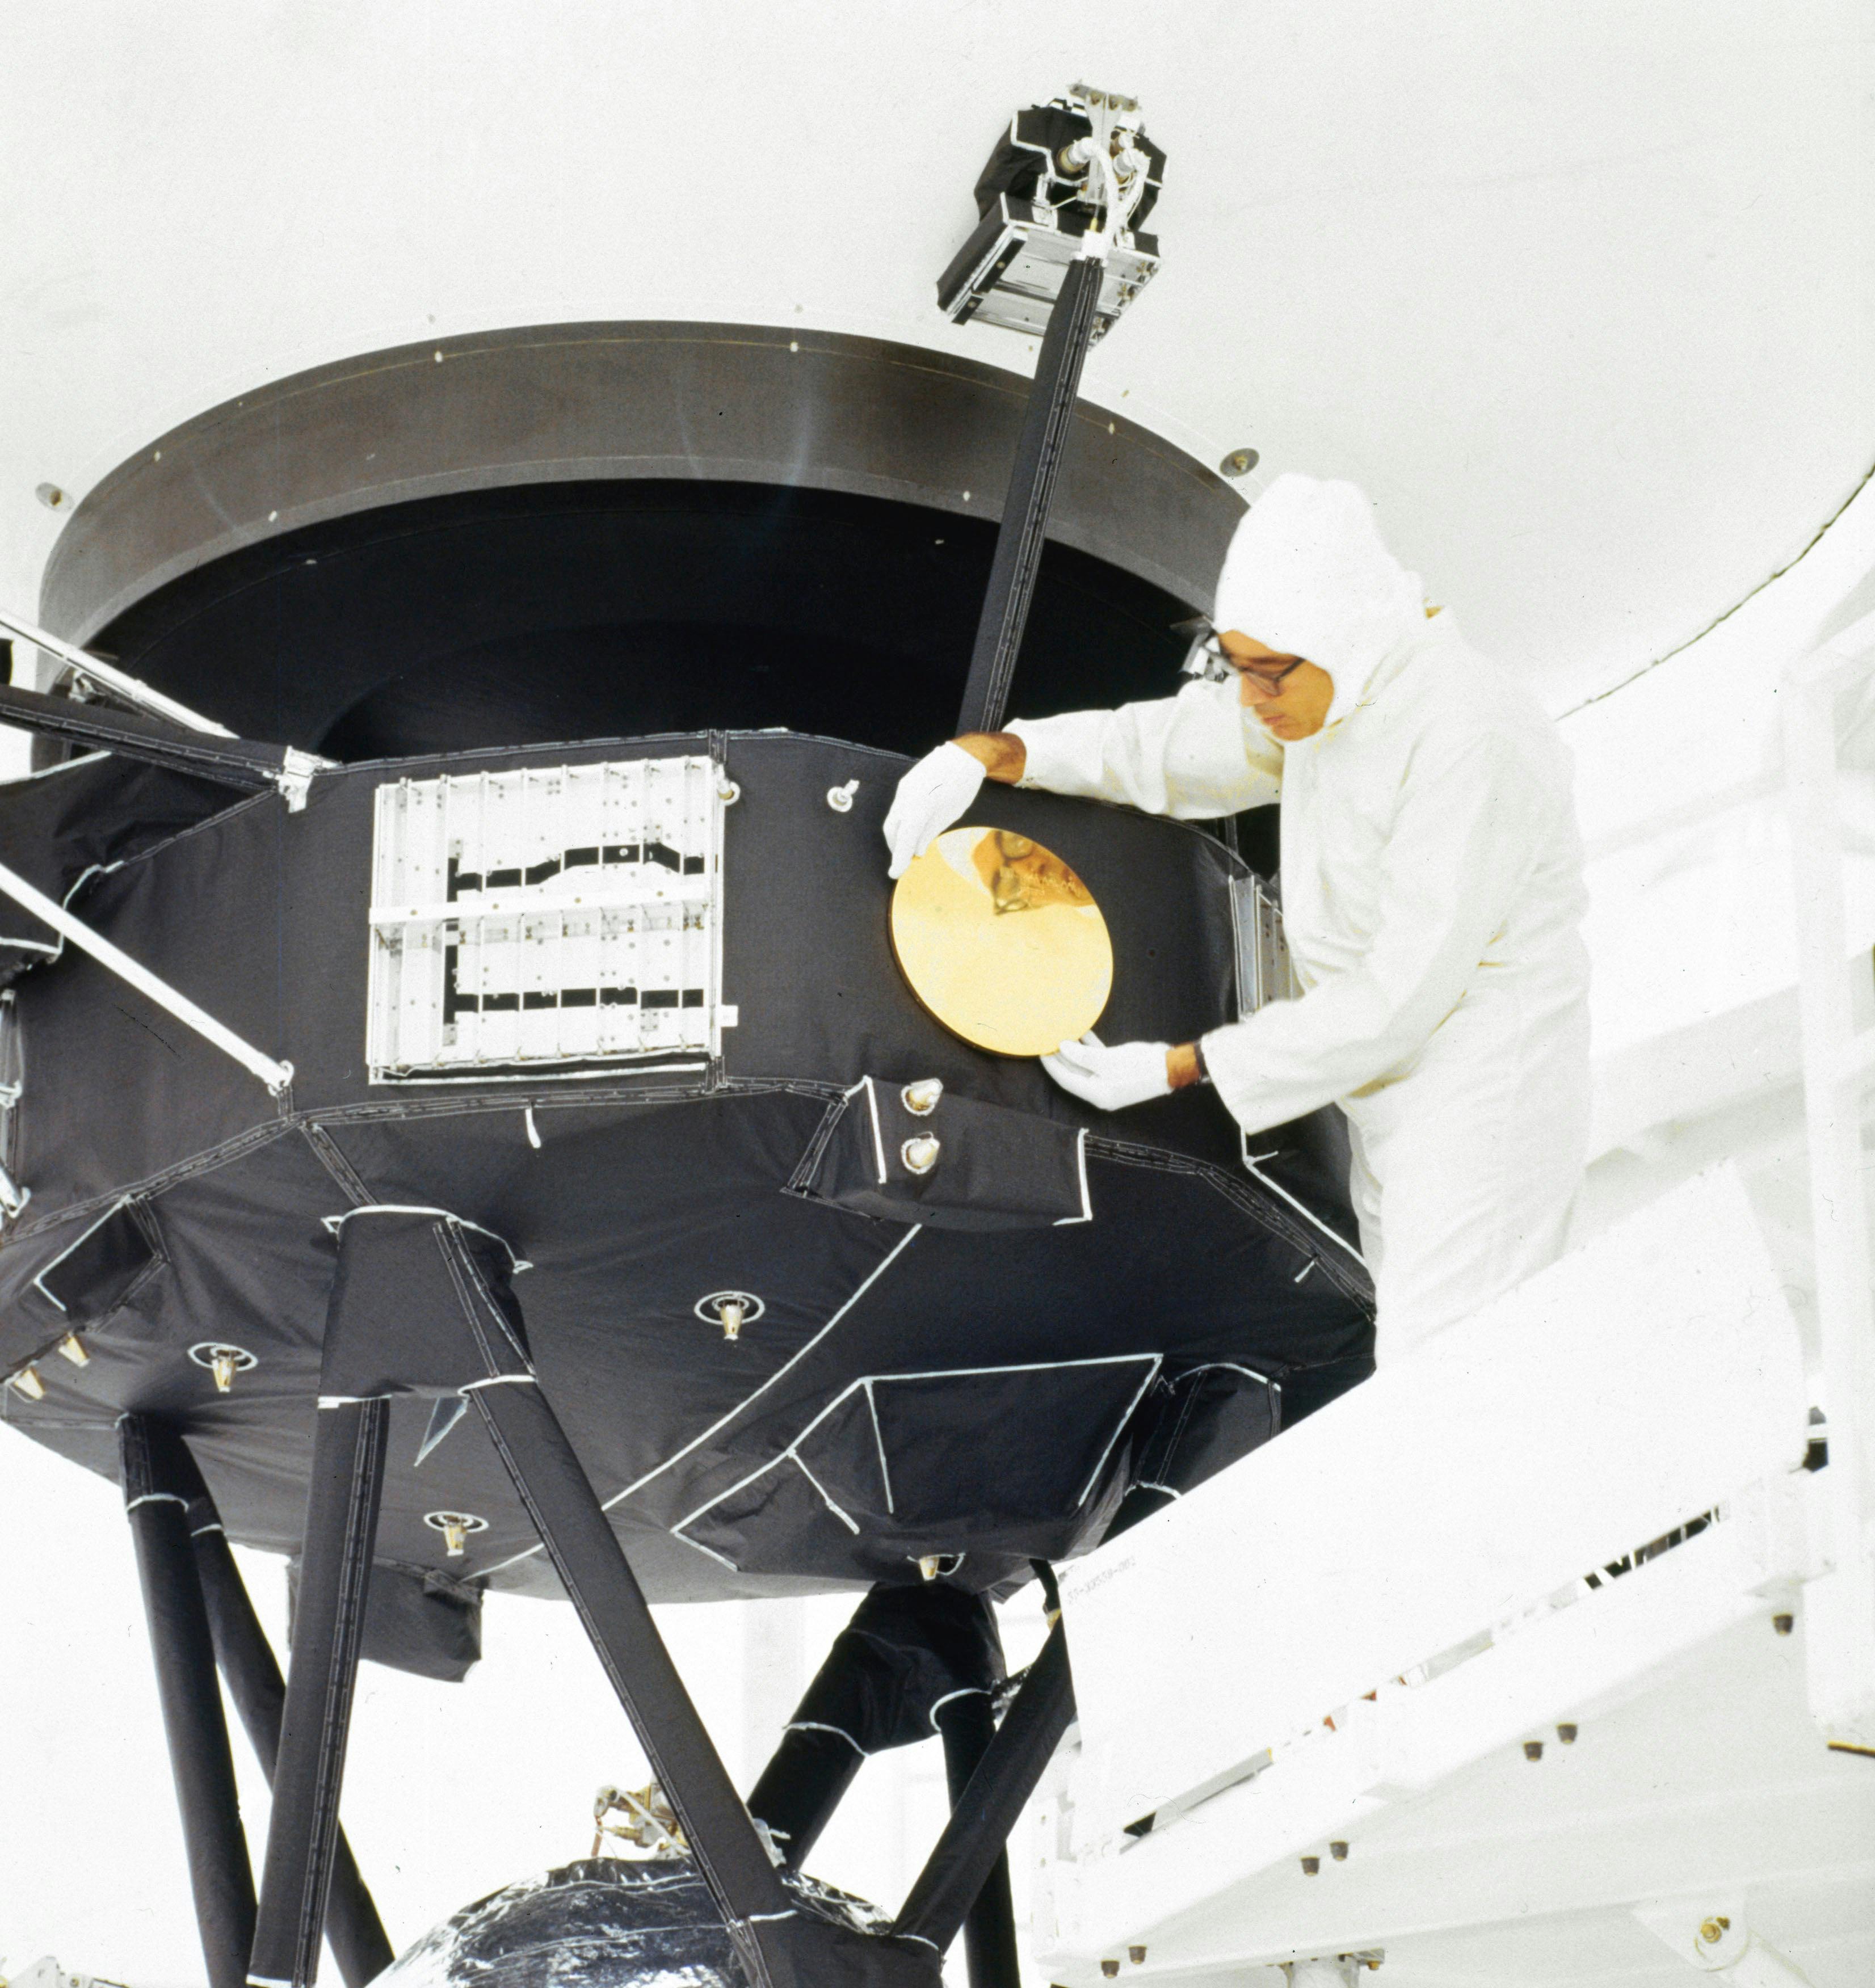 Voyager 2 in 1977